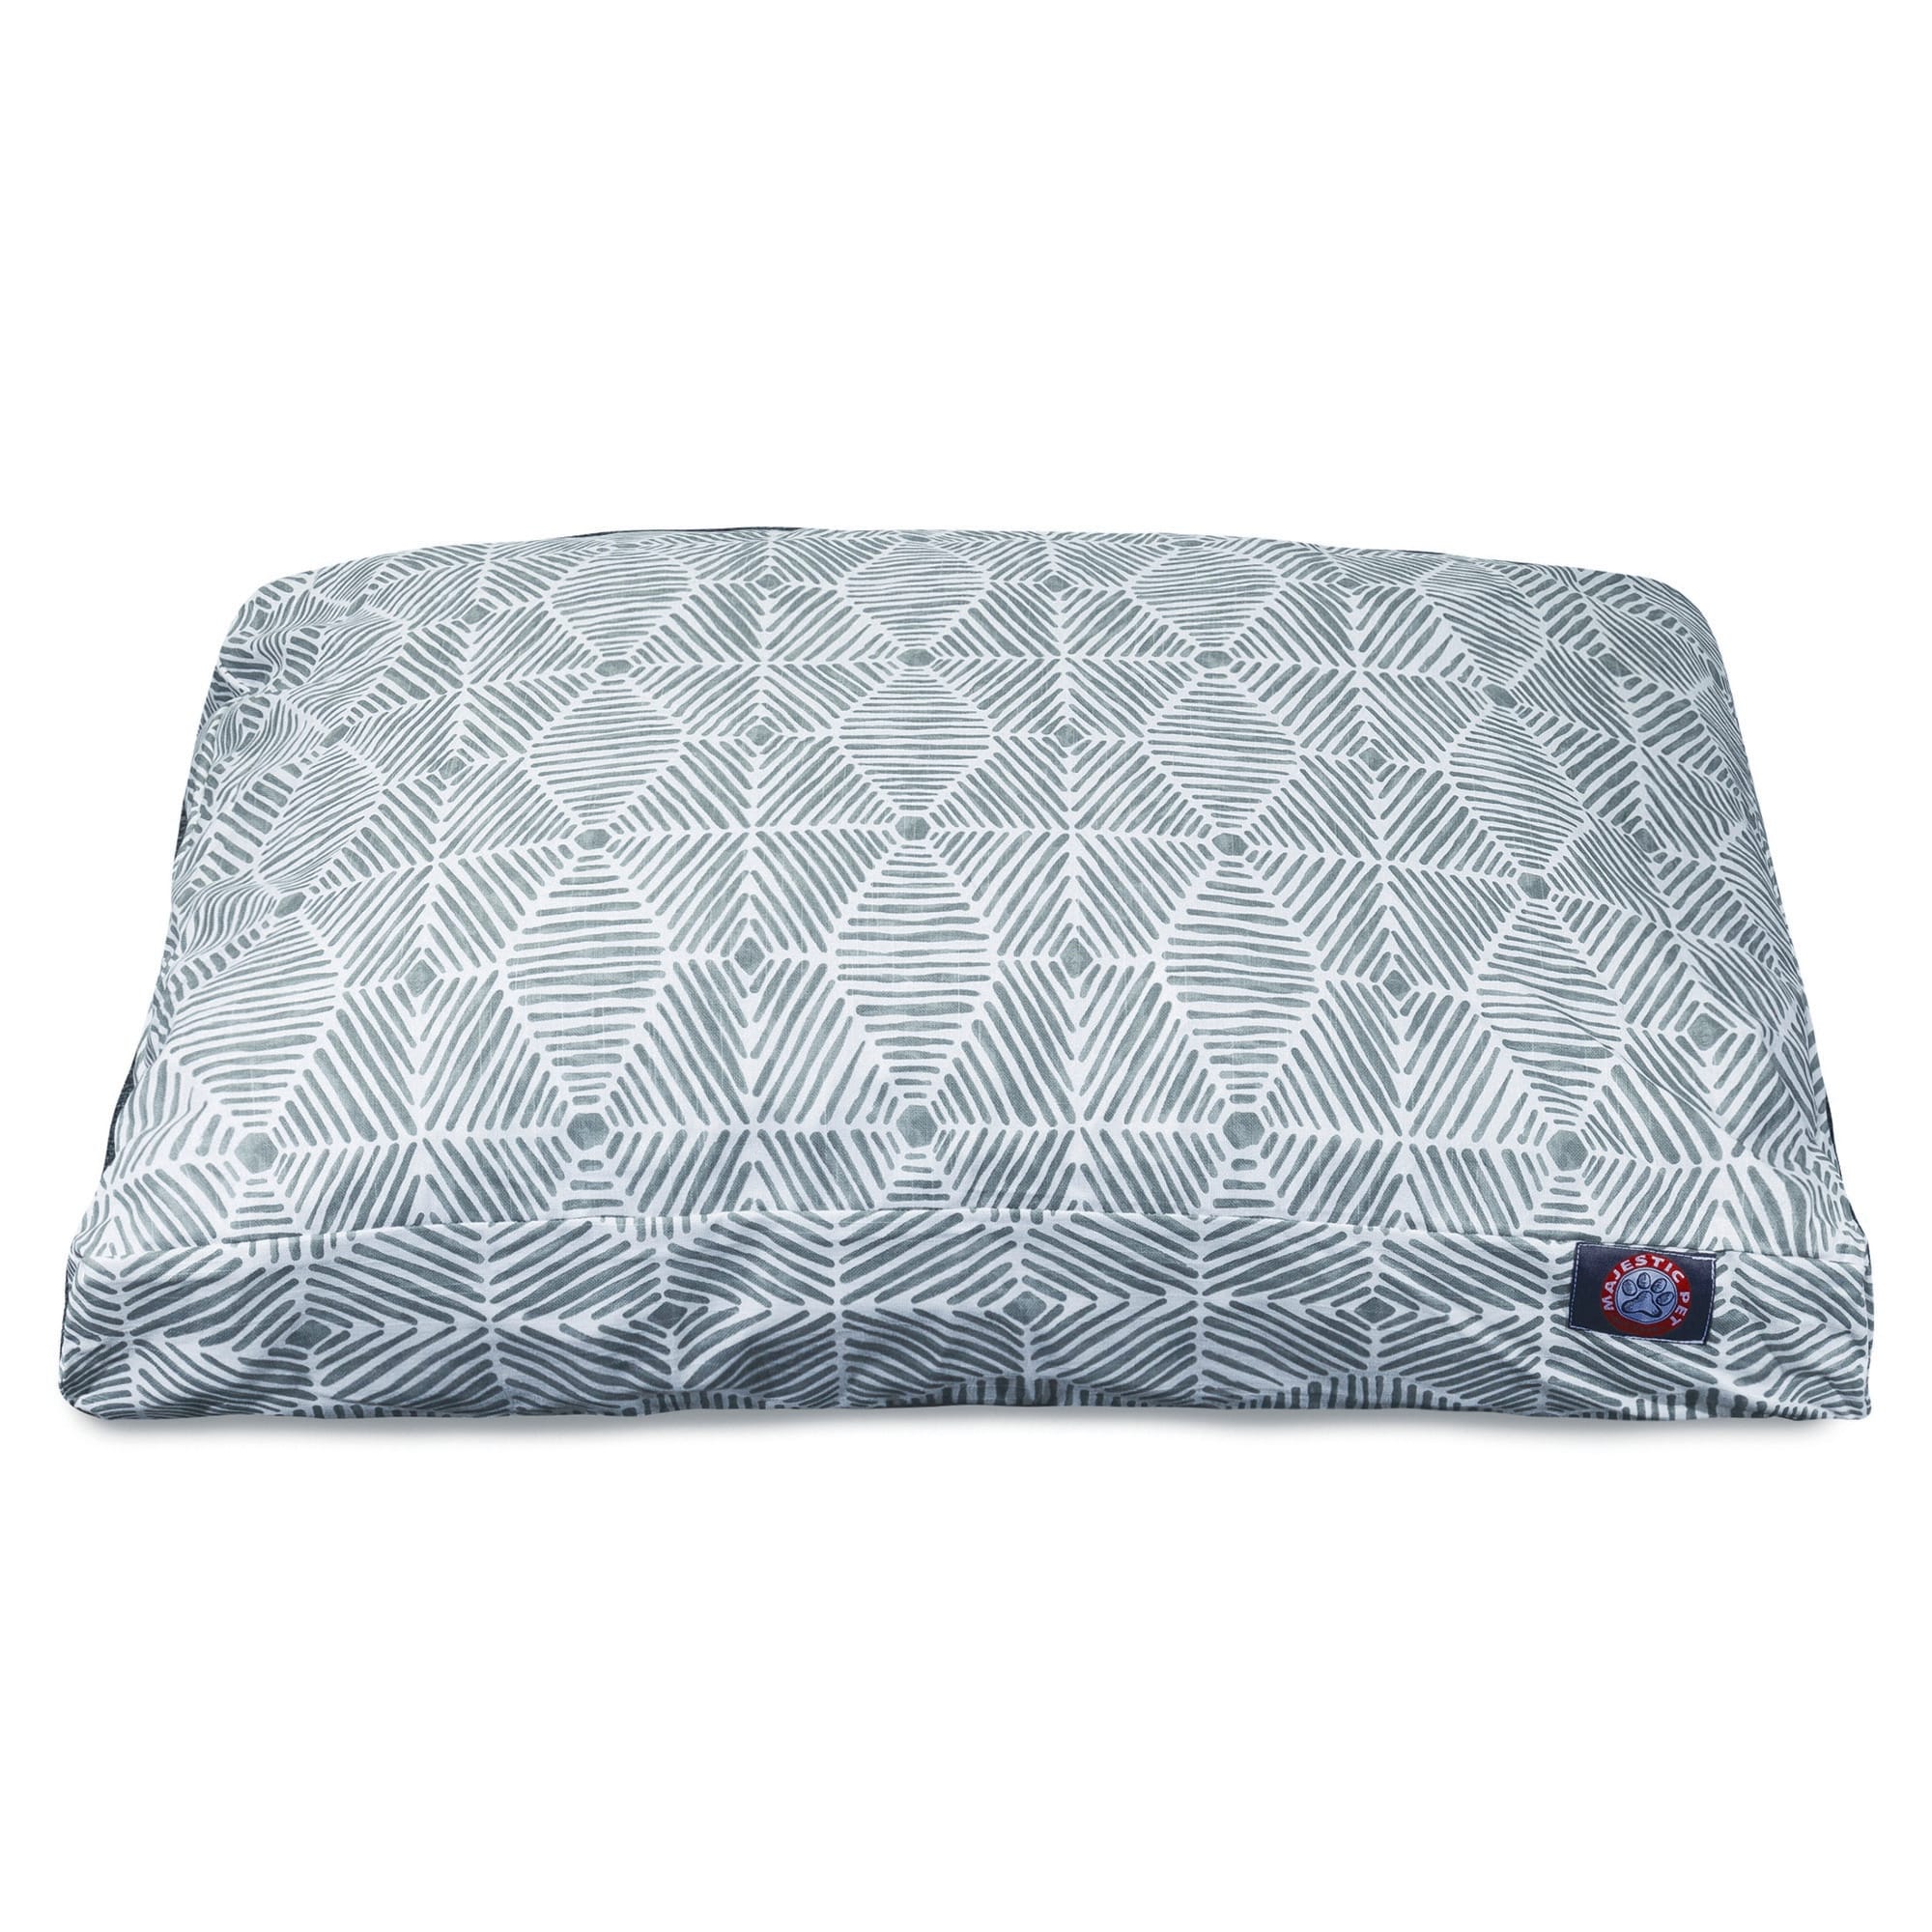 UPC 788995605669 product image for Majestic Pet Charlie Gray Rectangle Pet Bed, 27